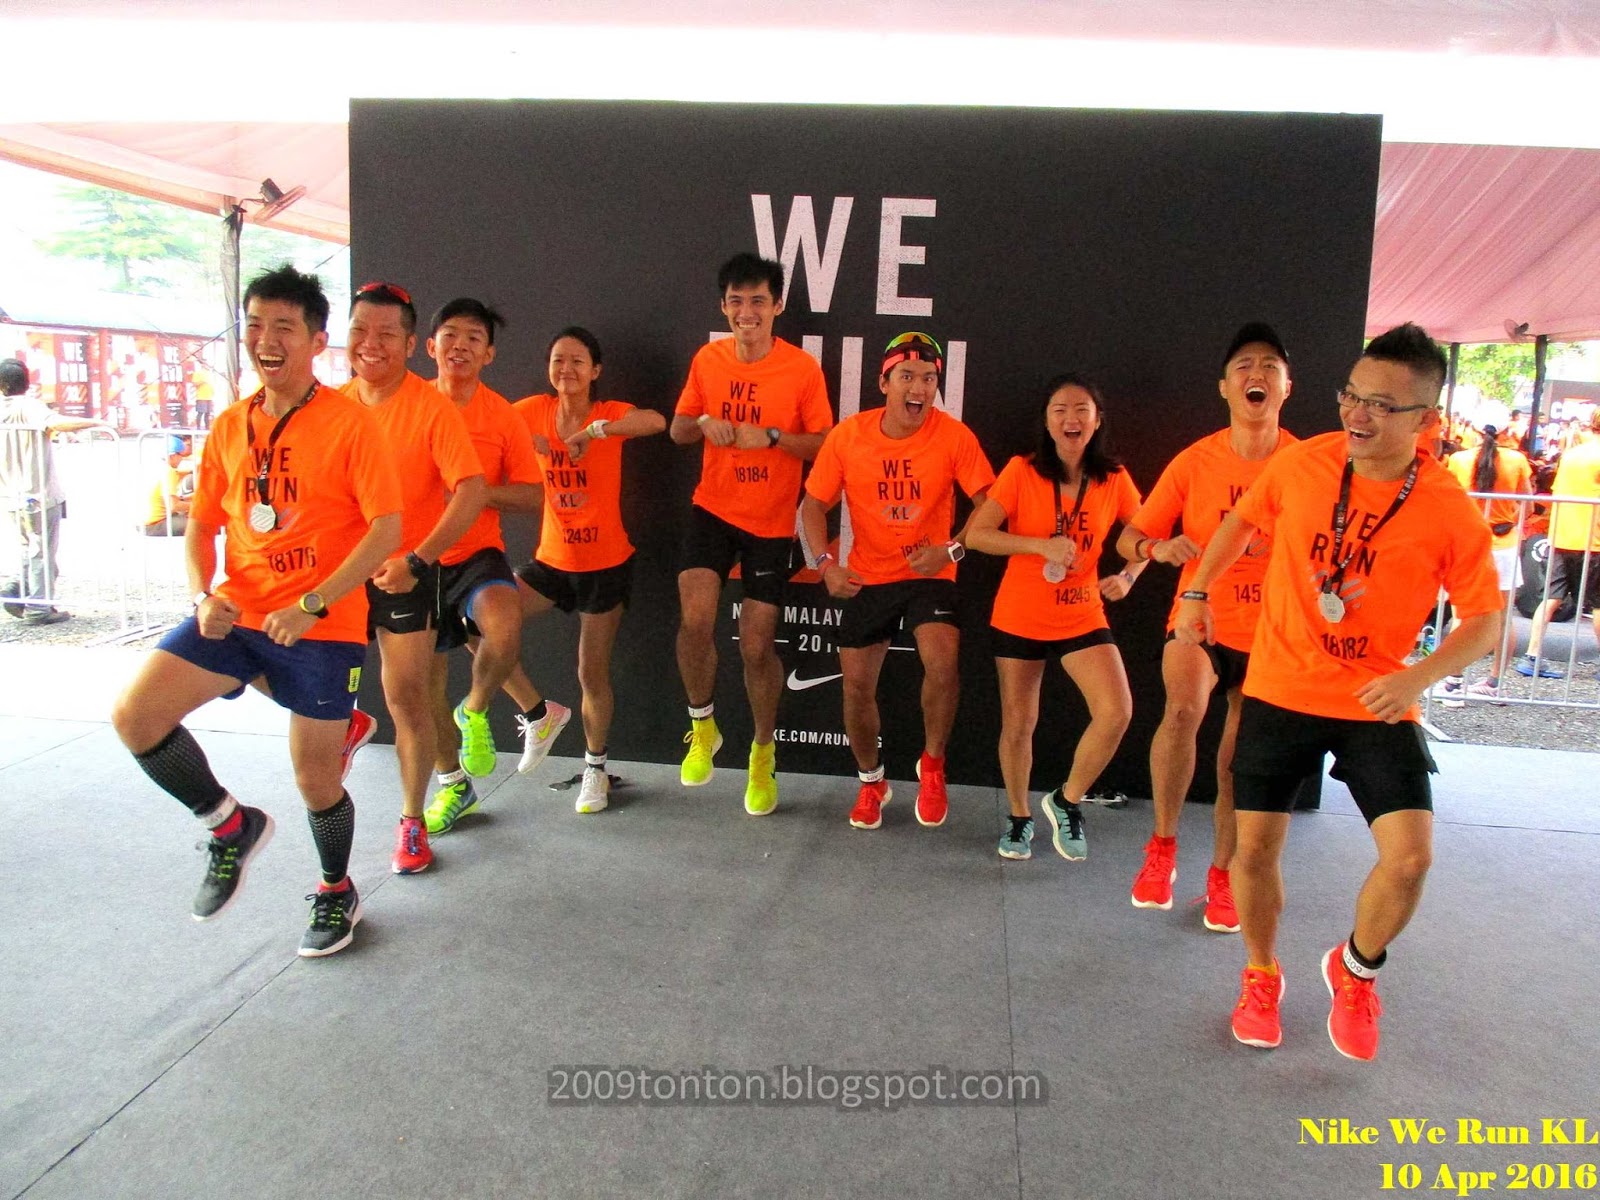 Nike KL 2016 - Top 5 Results